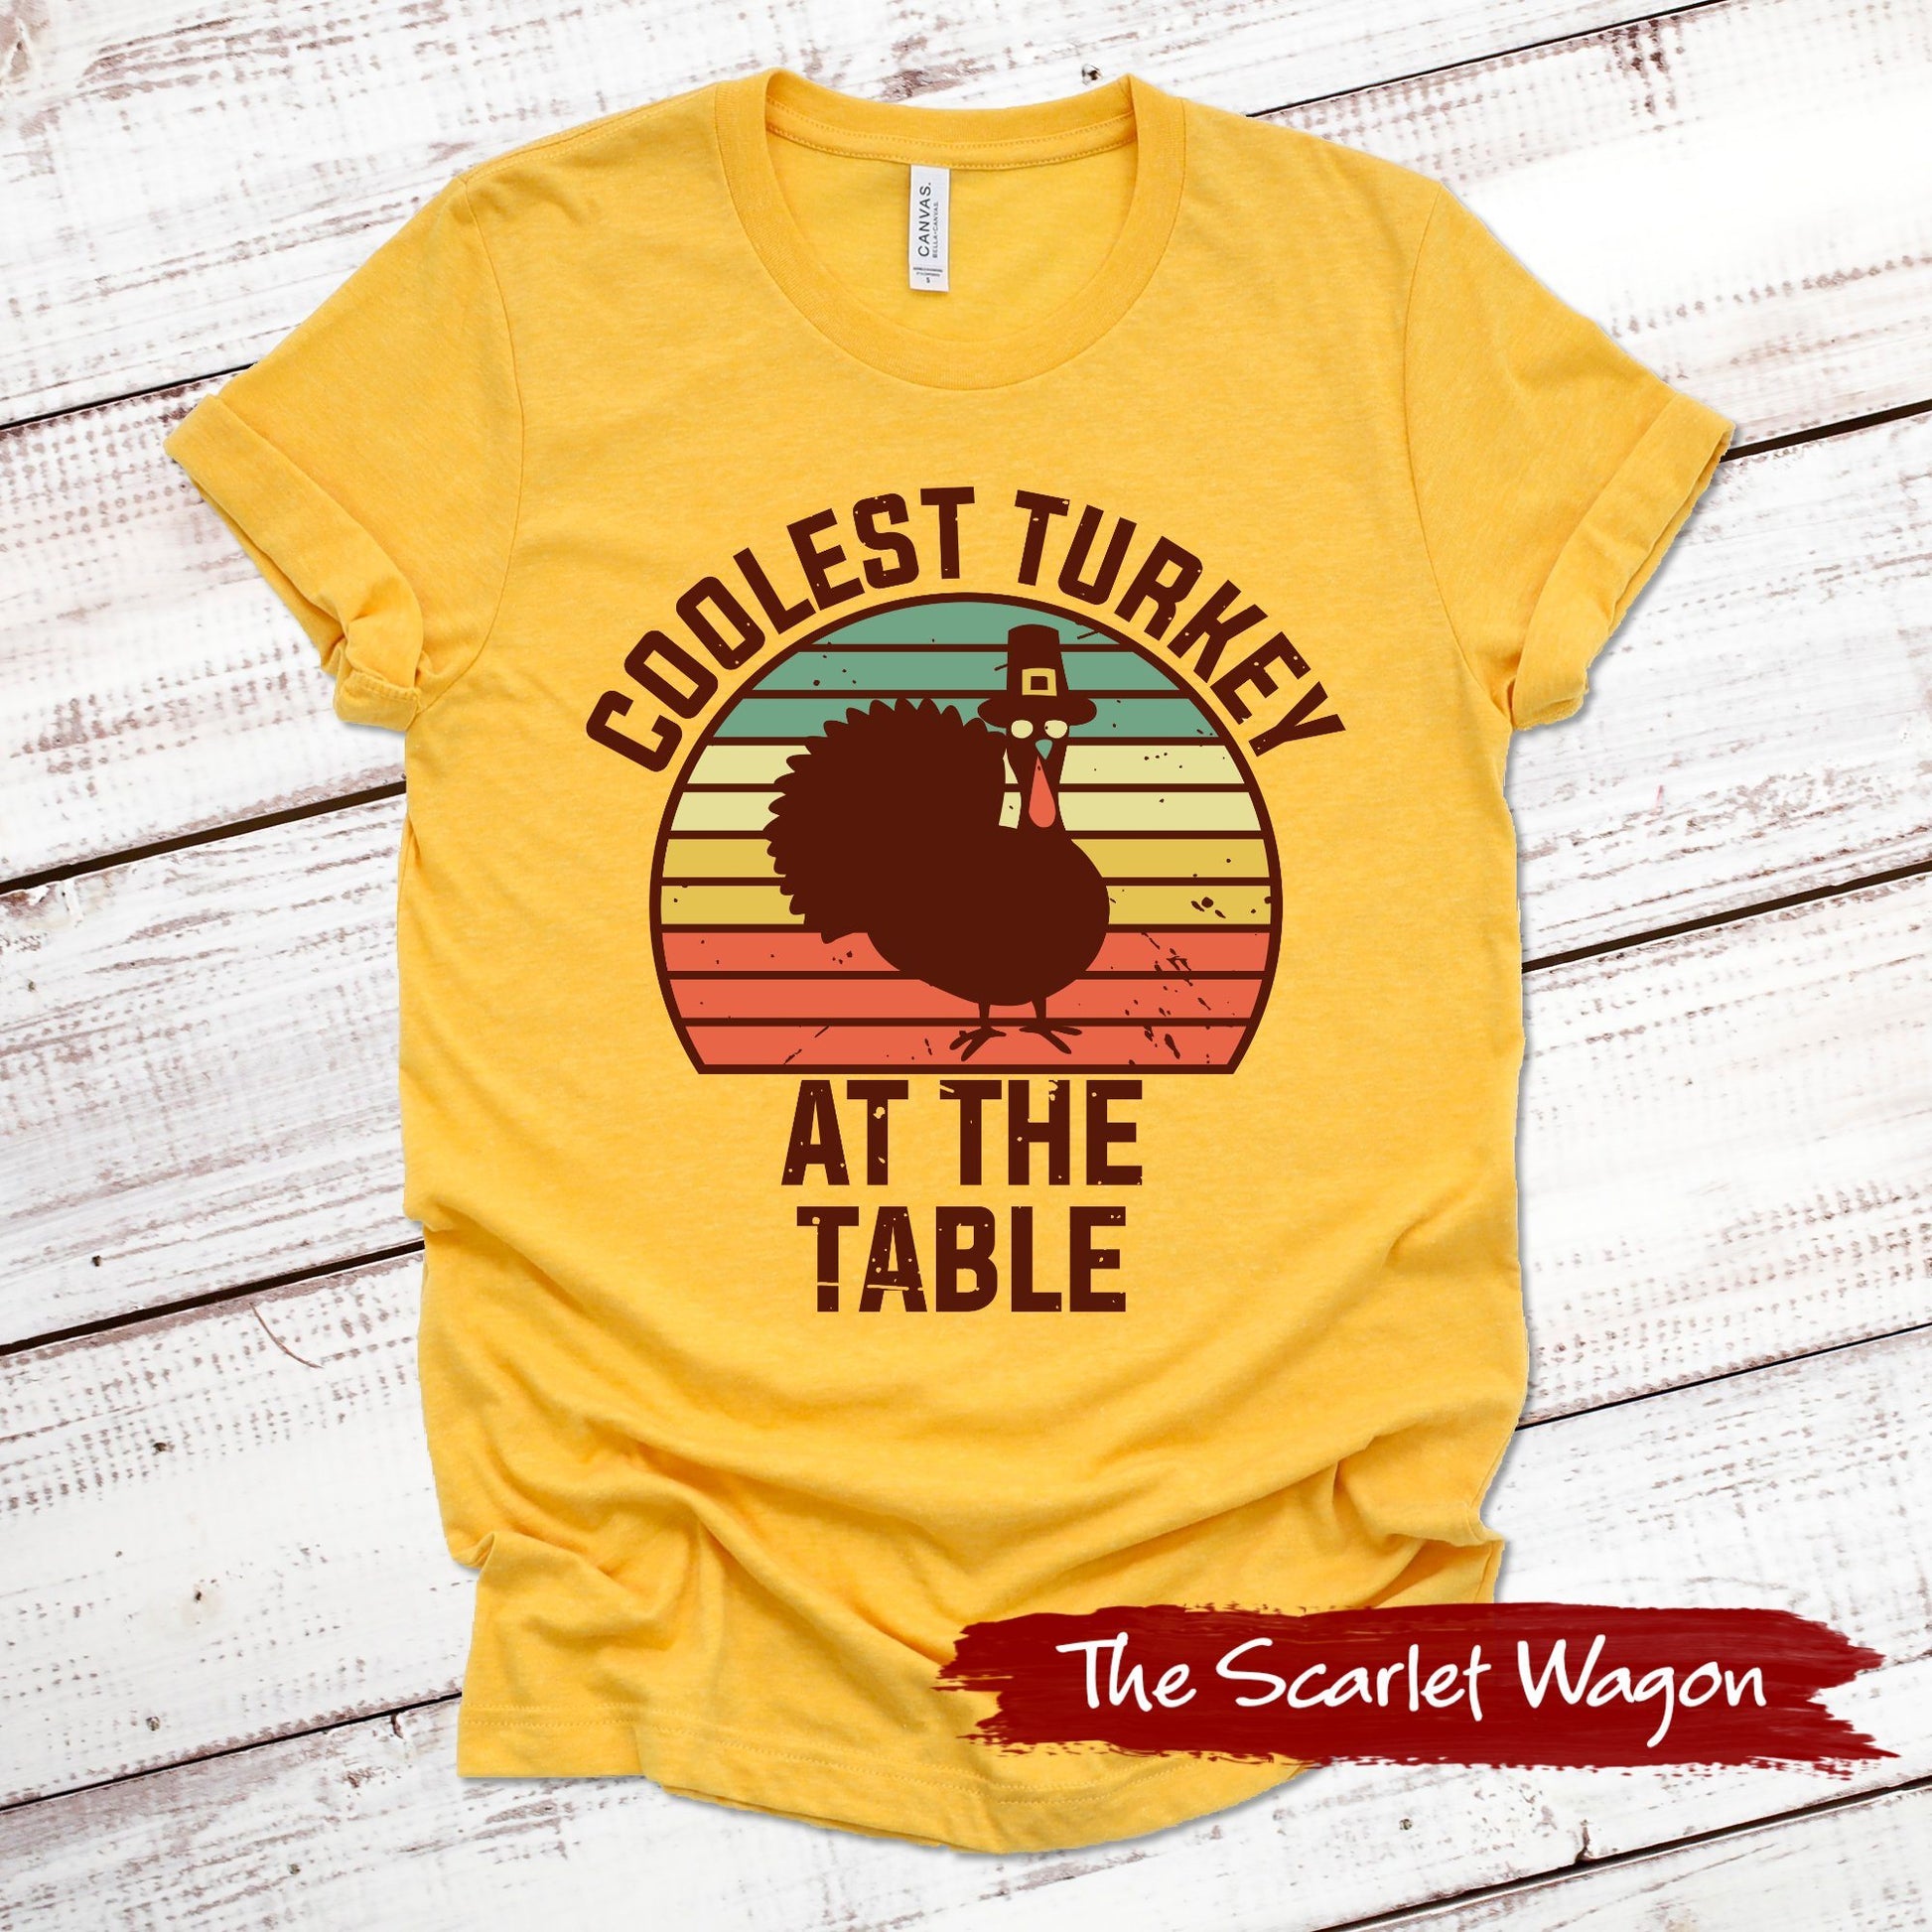 Coolest Turkey at the Table Fall Shirts Scarlet Wagon Heather Gold XS 